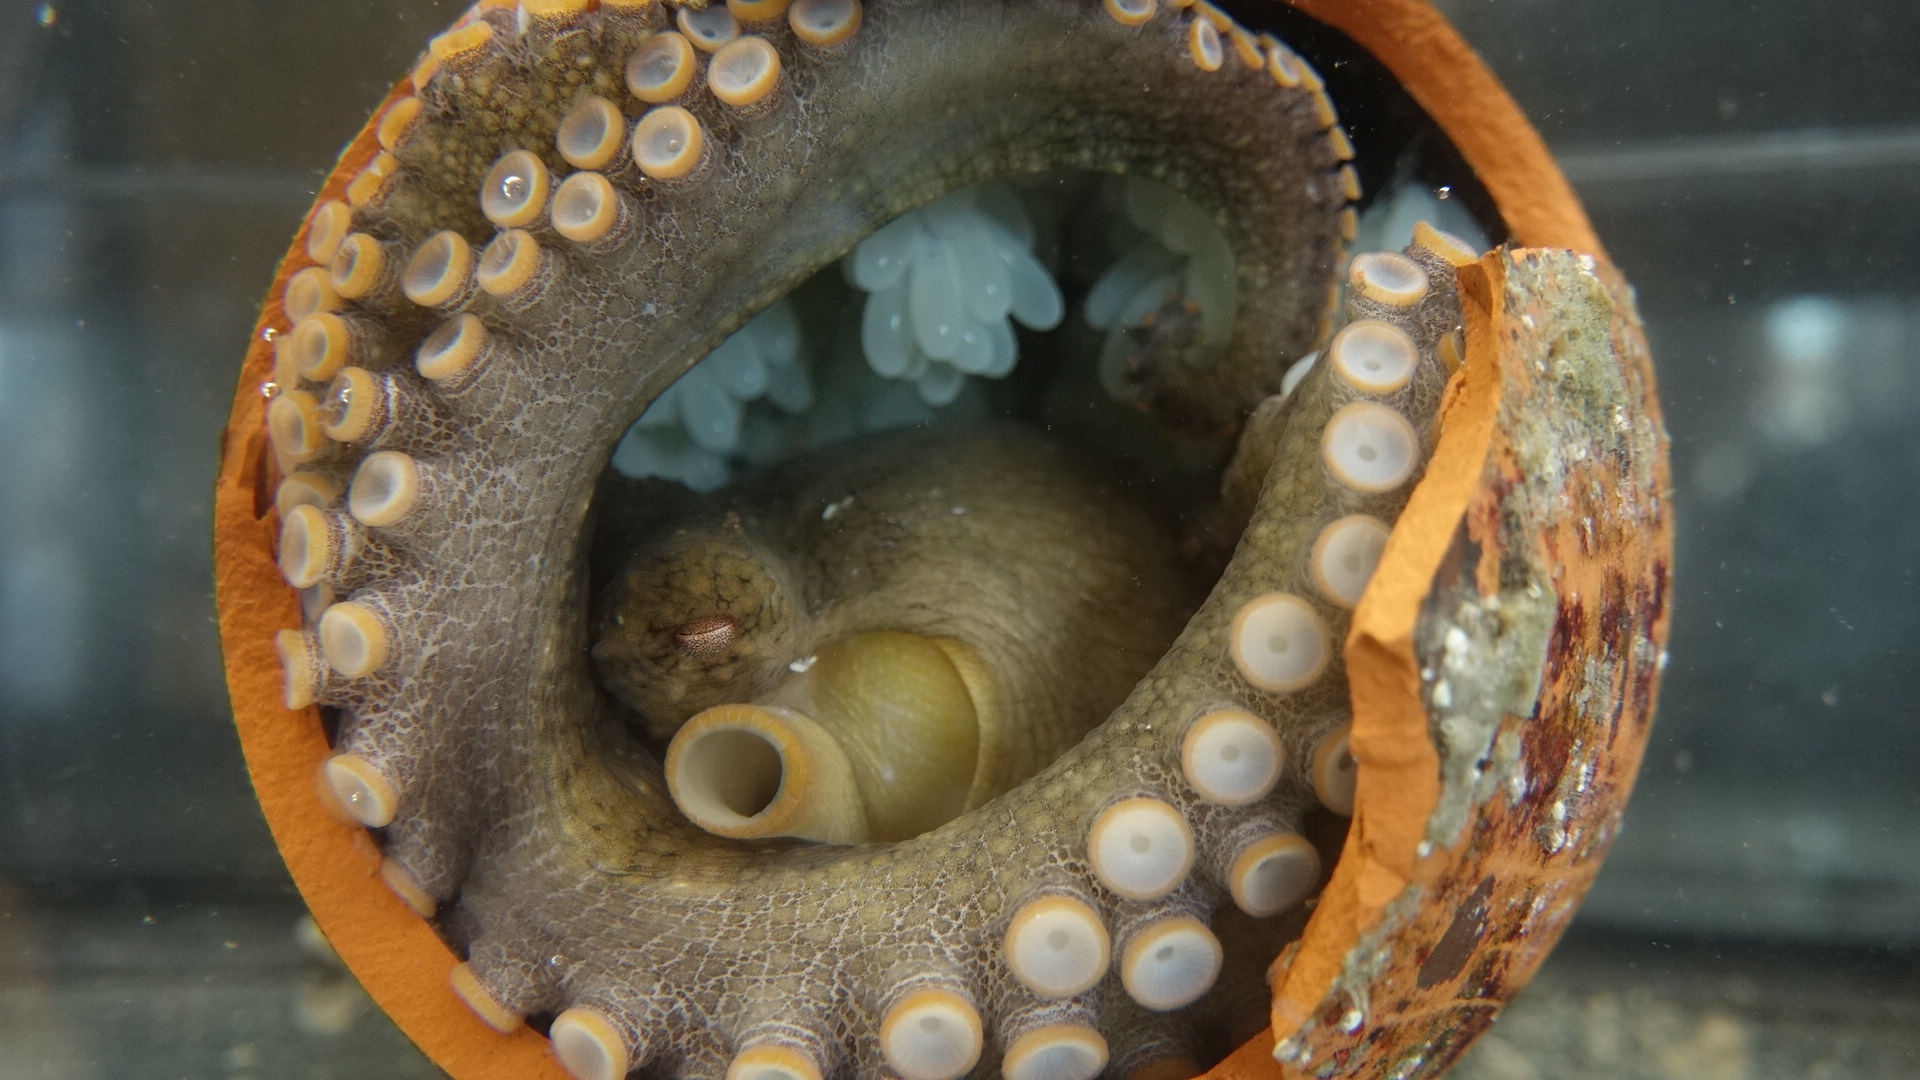 The California two-spot octopus (Octopus bimaculoides) has a circular blue eyespot on both sides of its head.